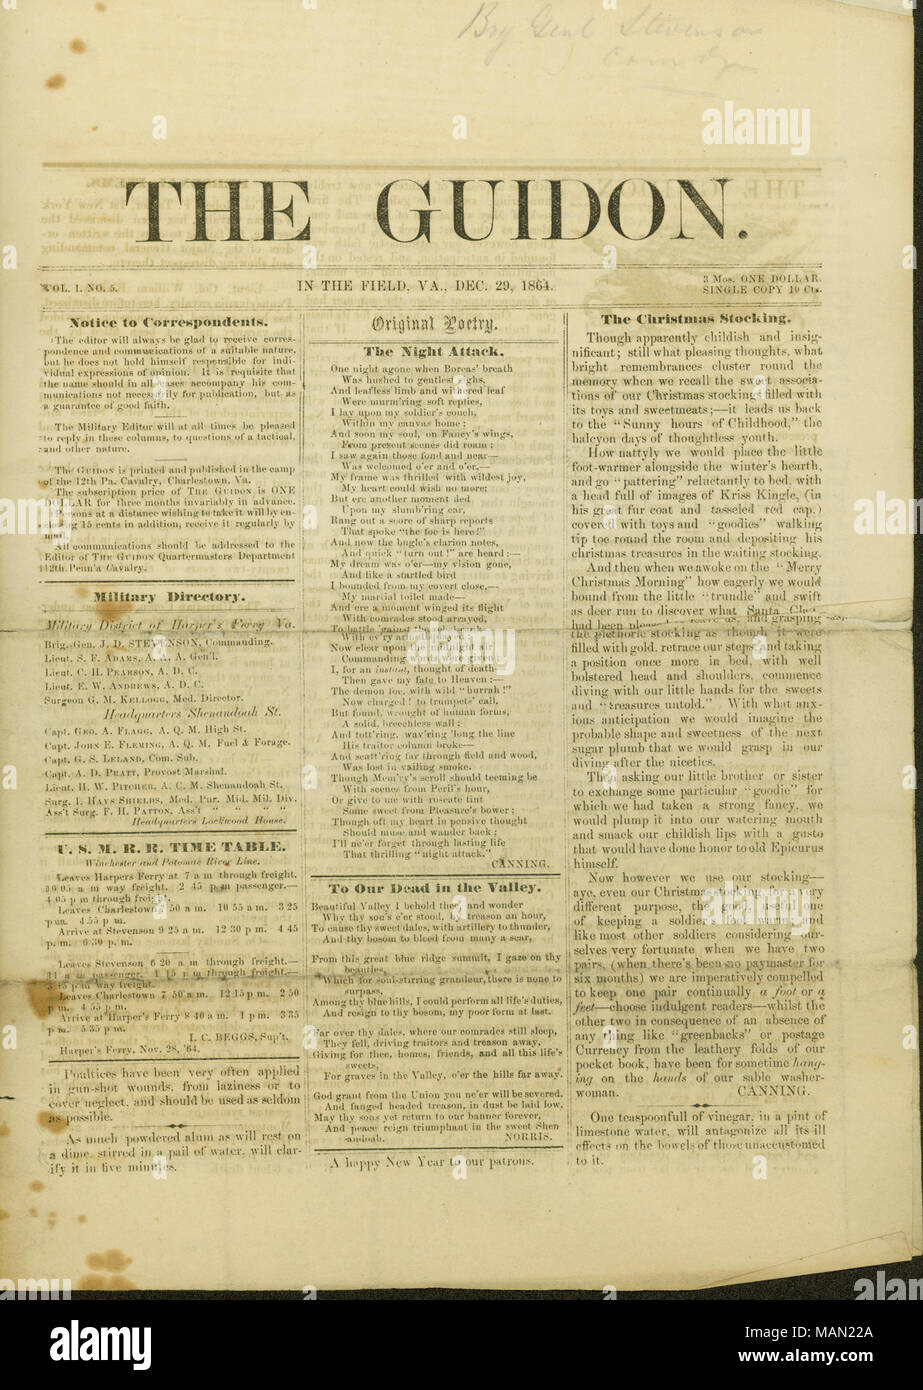 Includes poetry, reminisce of Christmas stockings, and news on the war. Title: Newspaper issue of The Guidon, printed and published in the camp of the 12th Pa. Cavalry, December 29, 1864  . 29 December 1864. Stock Photo